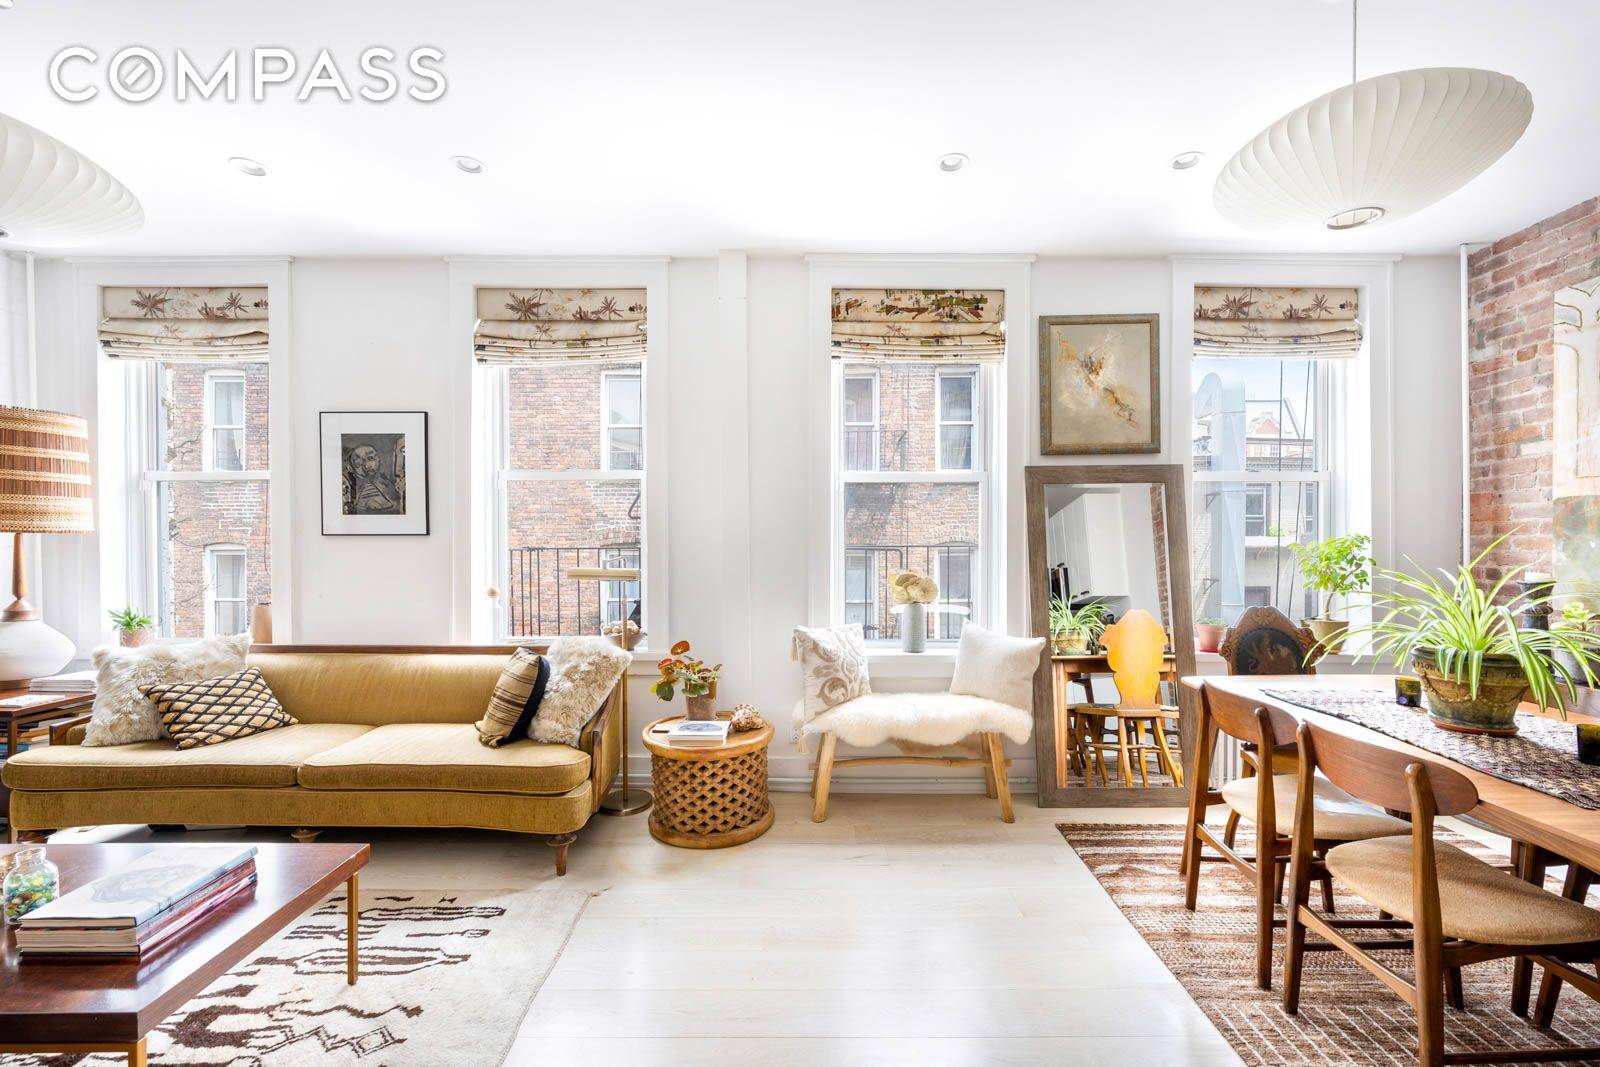 This flawless East Village two bedroom home blends historic details from the c.